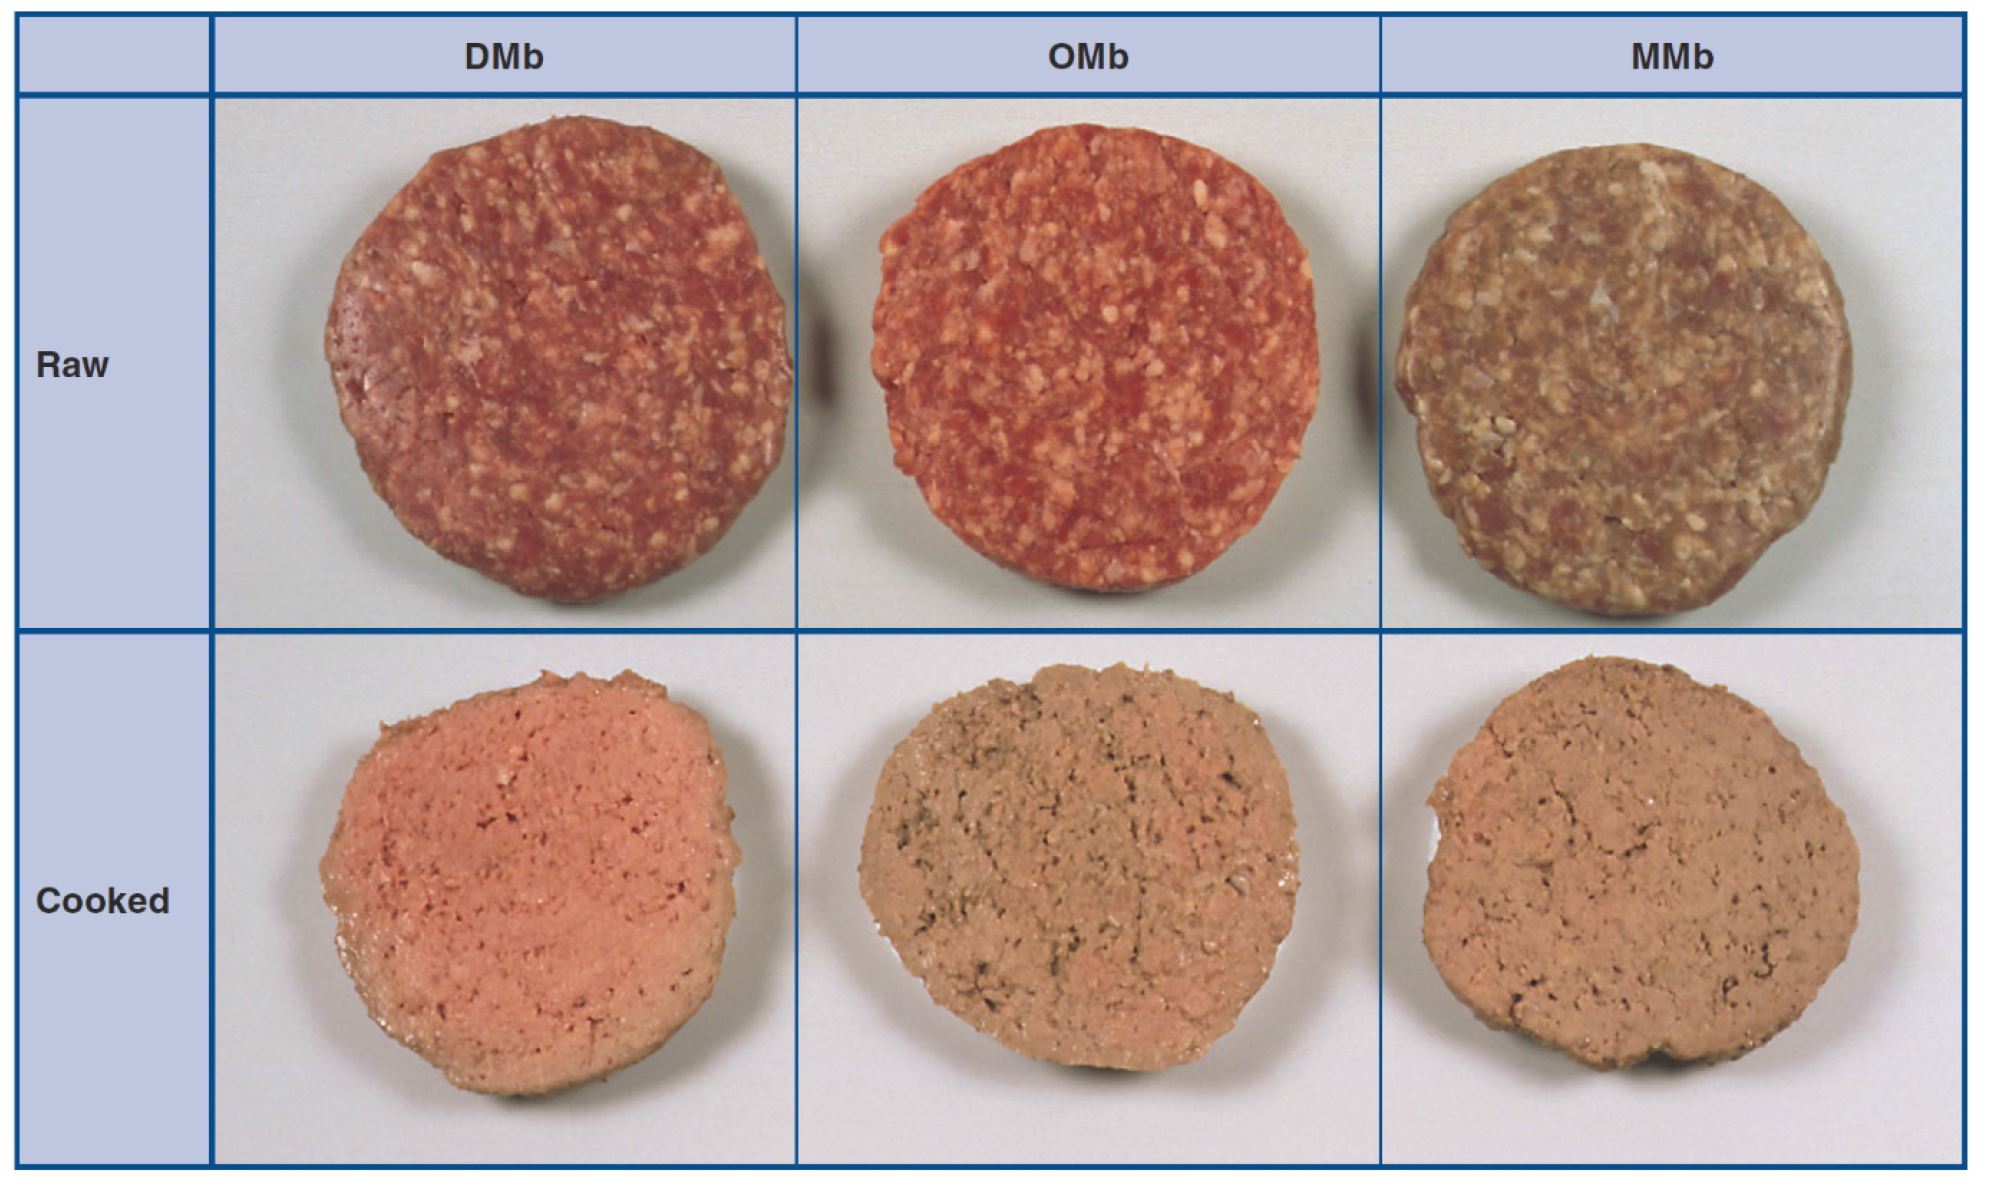 Is Hamburger Meat Spoiled When It Turns Grey or Brown Before Cooking? : Meat  Preparation Tips 